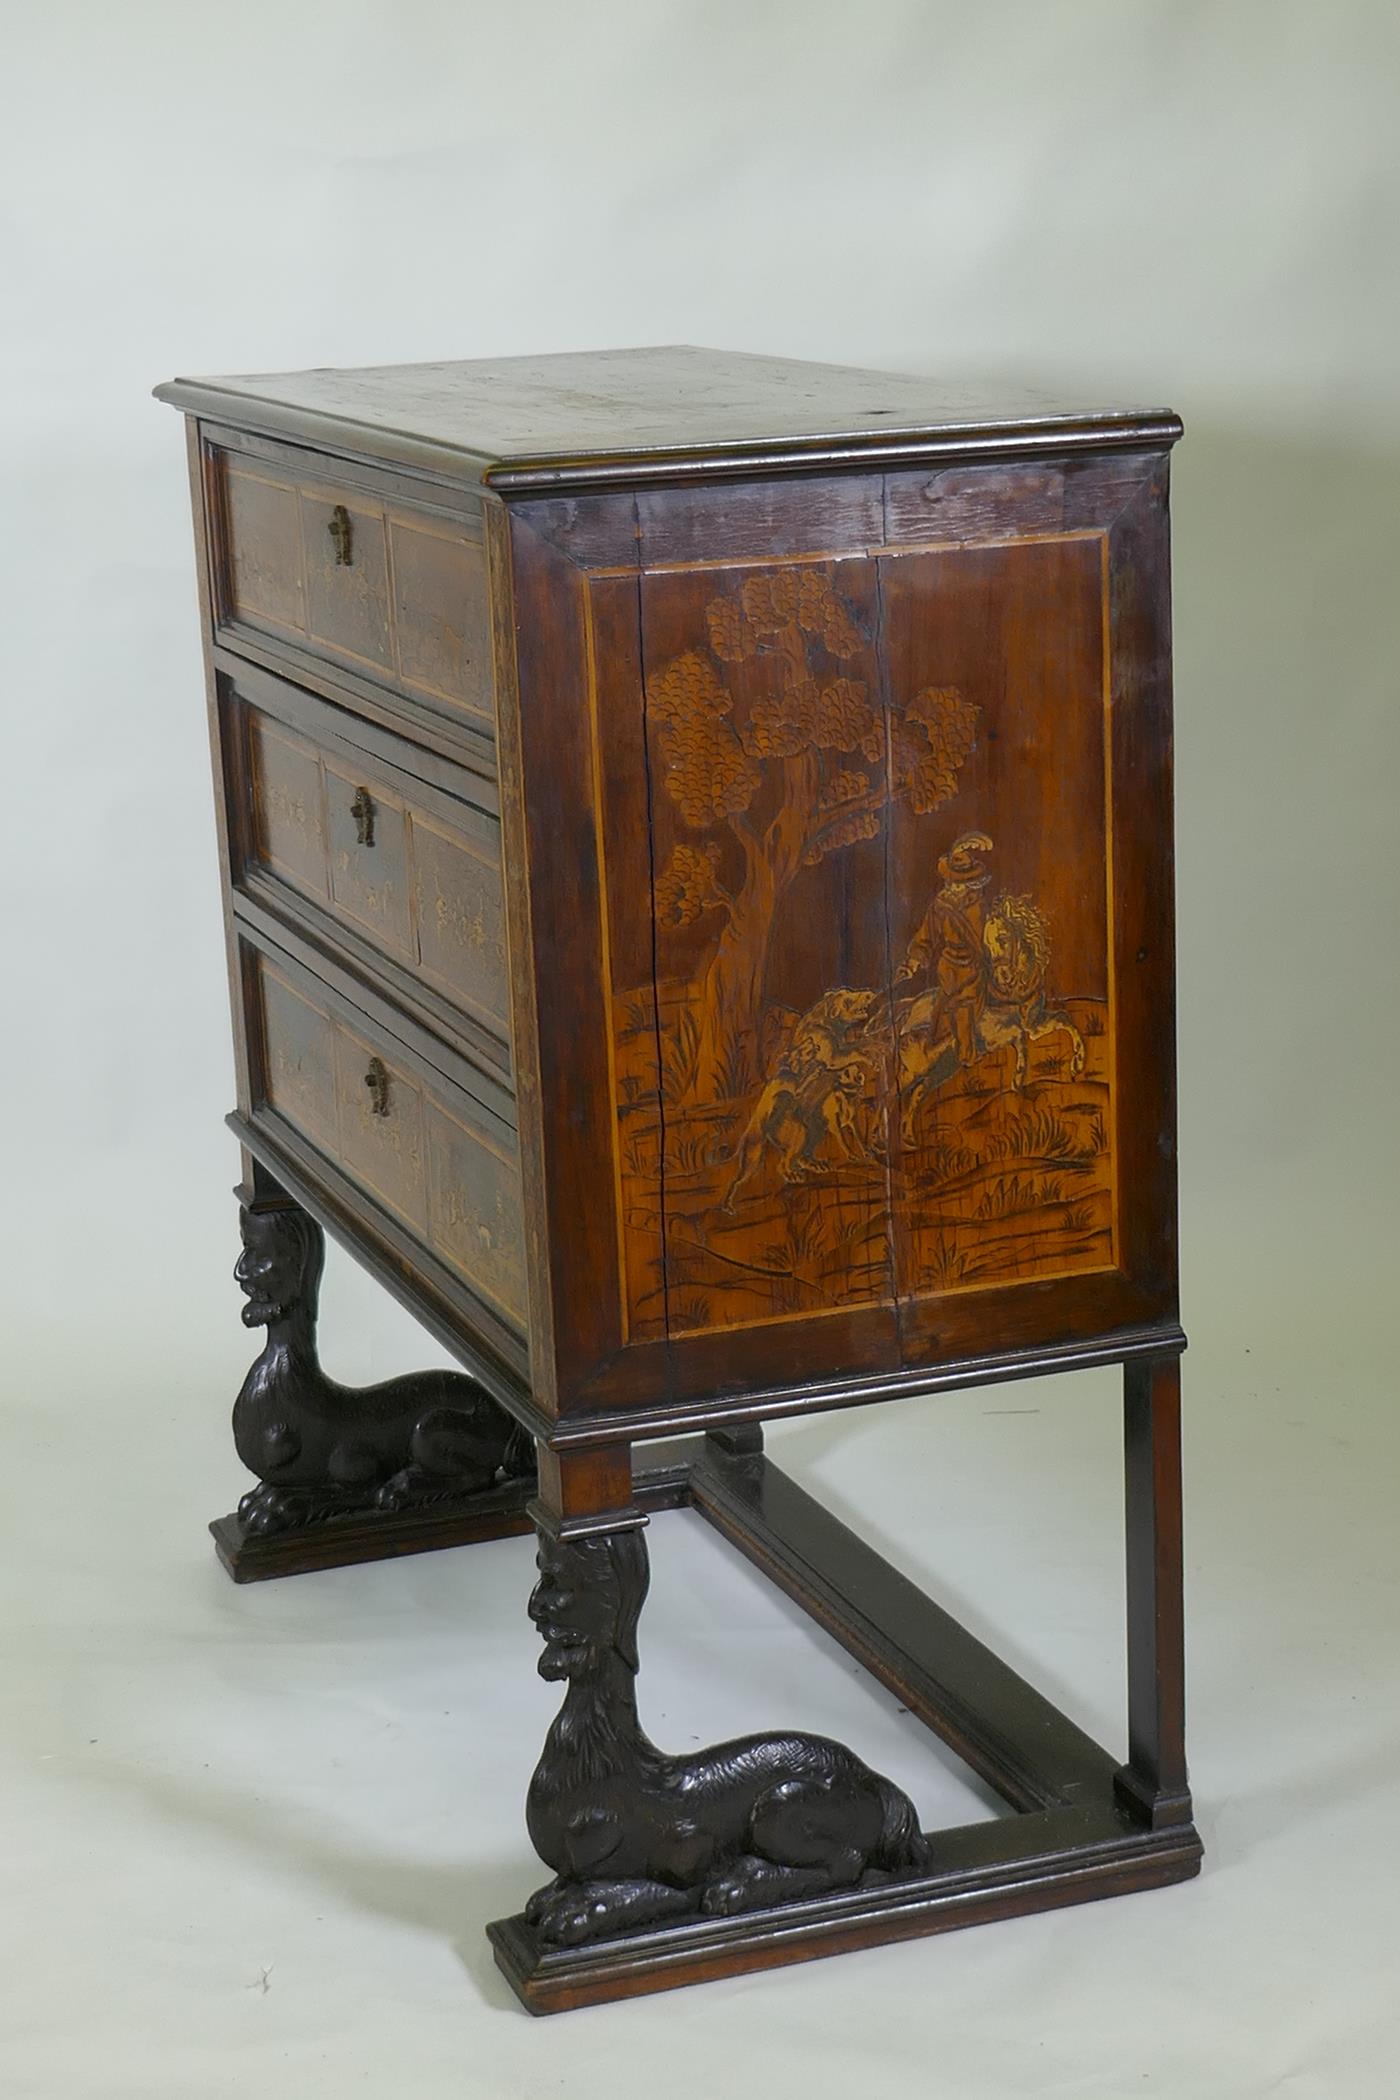 C18th/C19th Italian/Swiss marquetry inlaid walnut chest of three drawers, inlaid with hunting - Image 6 of 10